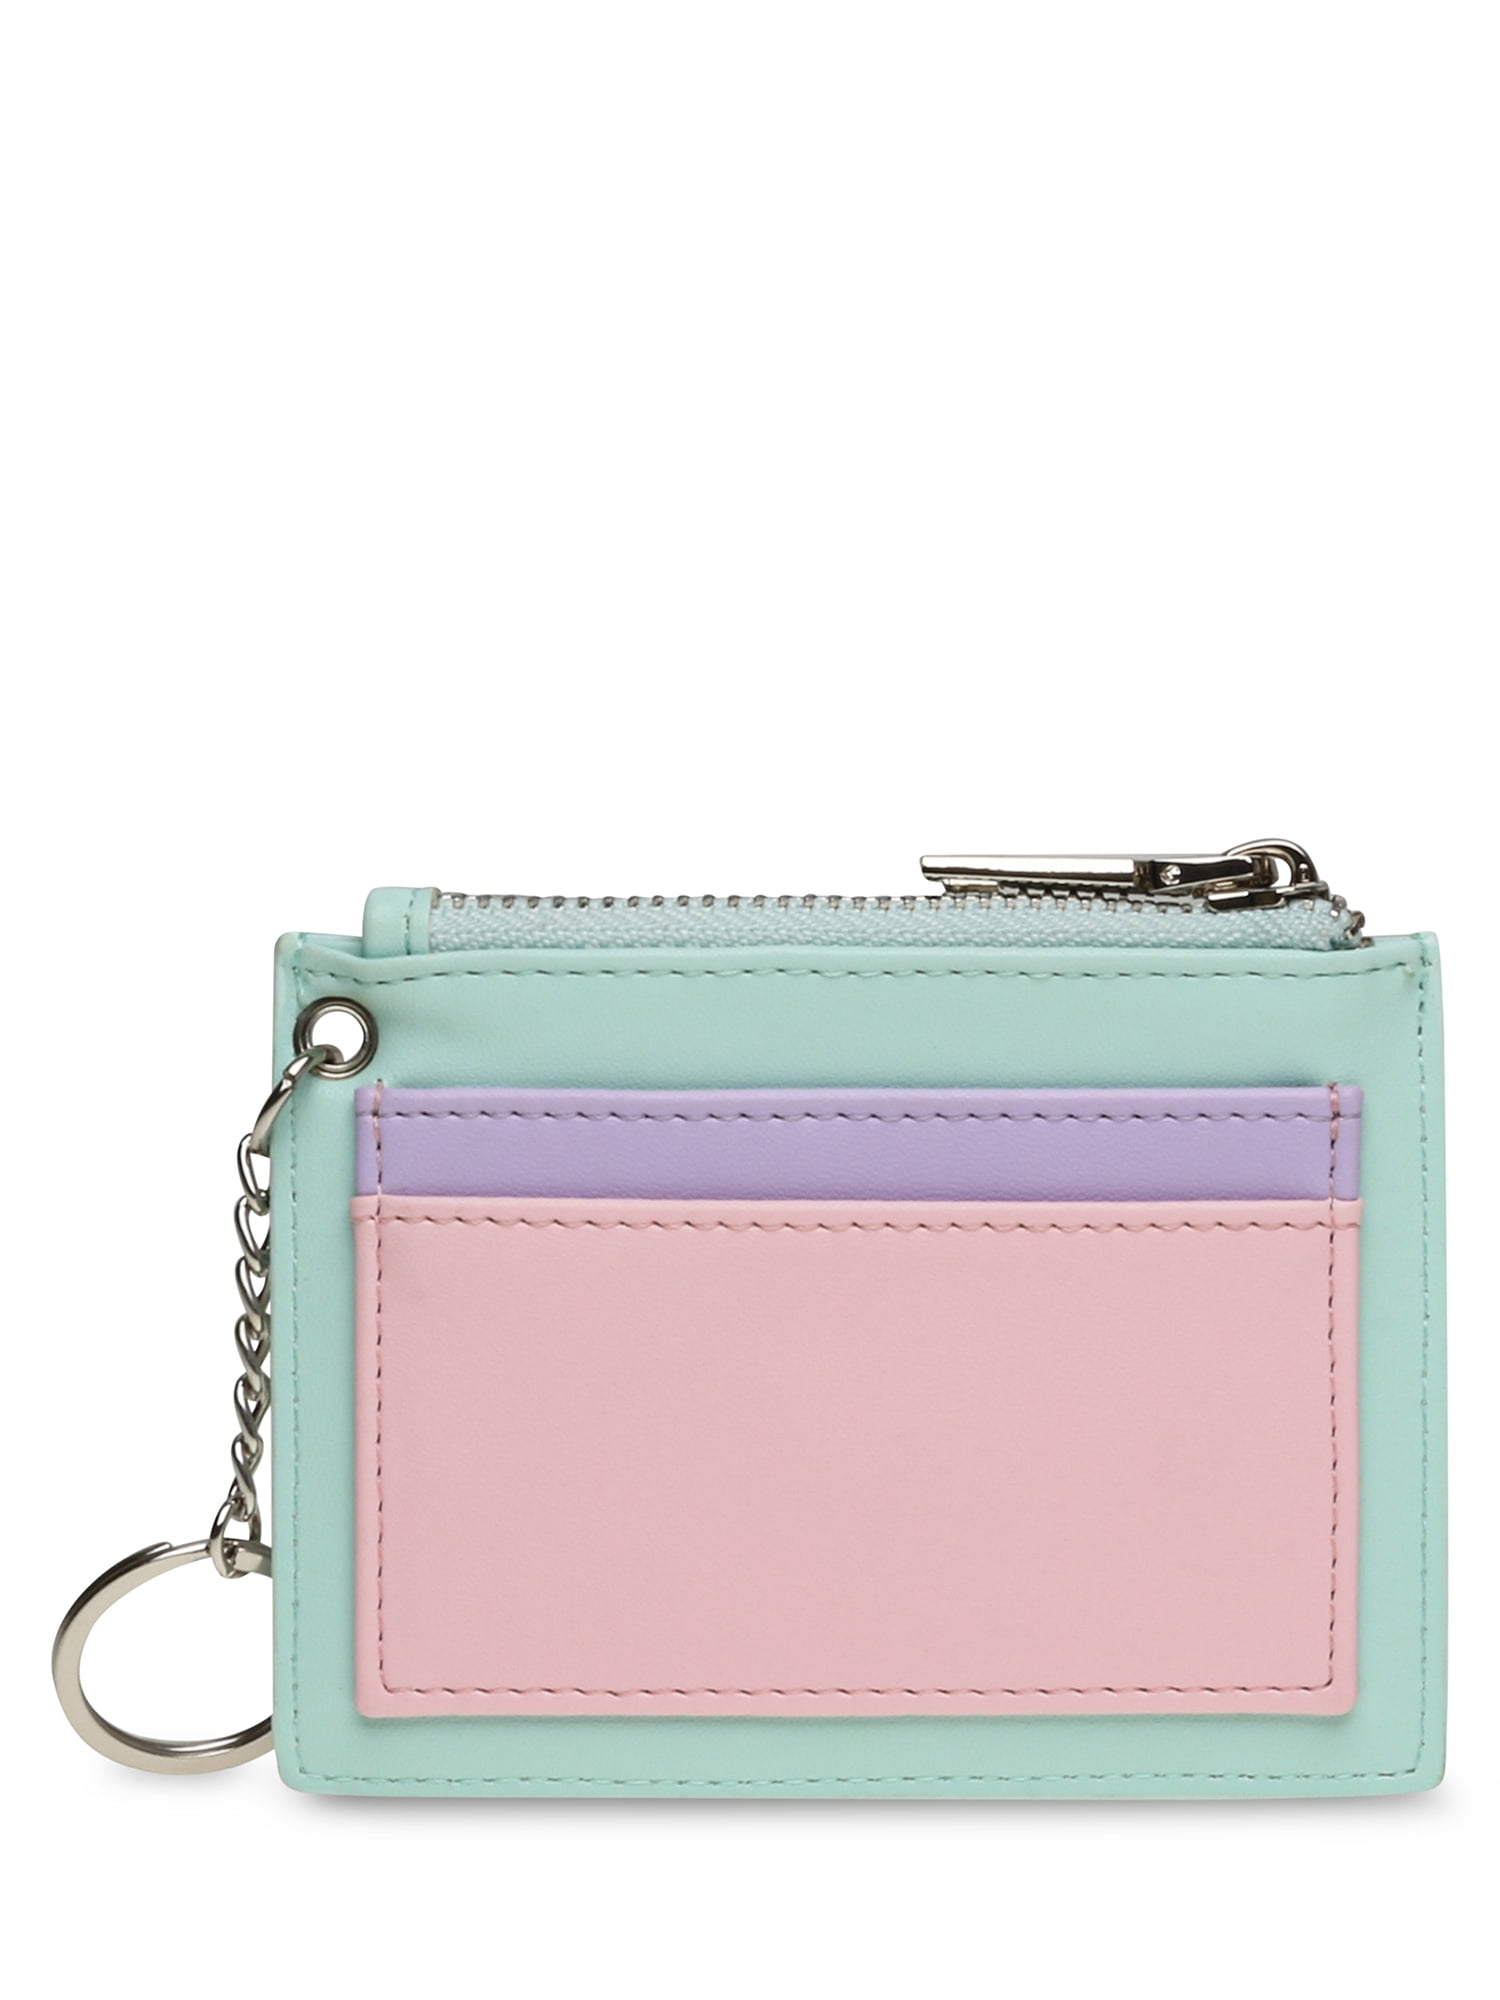 No Boundaries Women's Card Holder with Key Ring, Colorblock